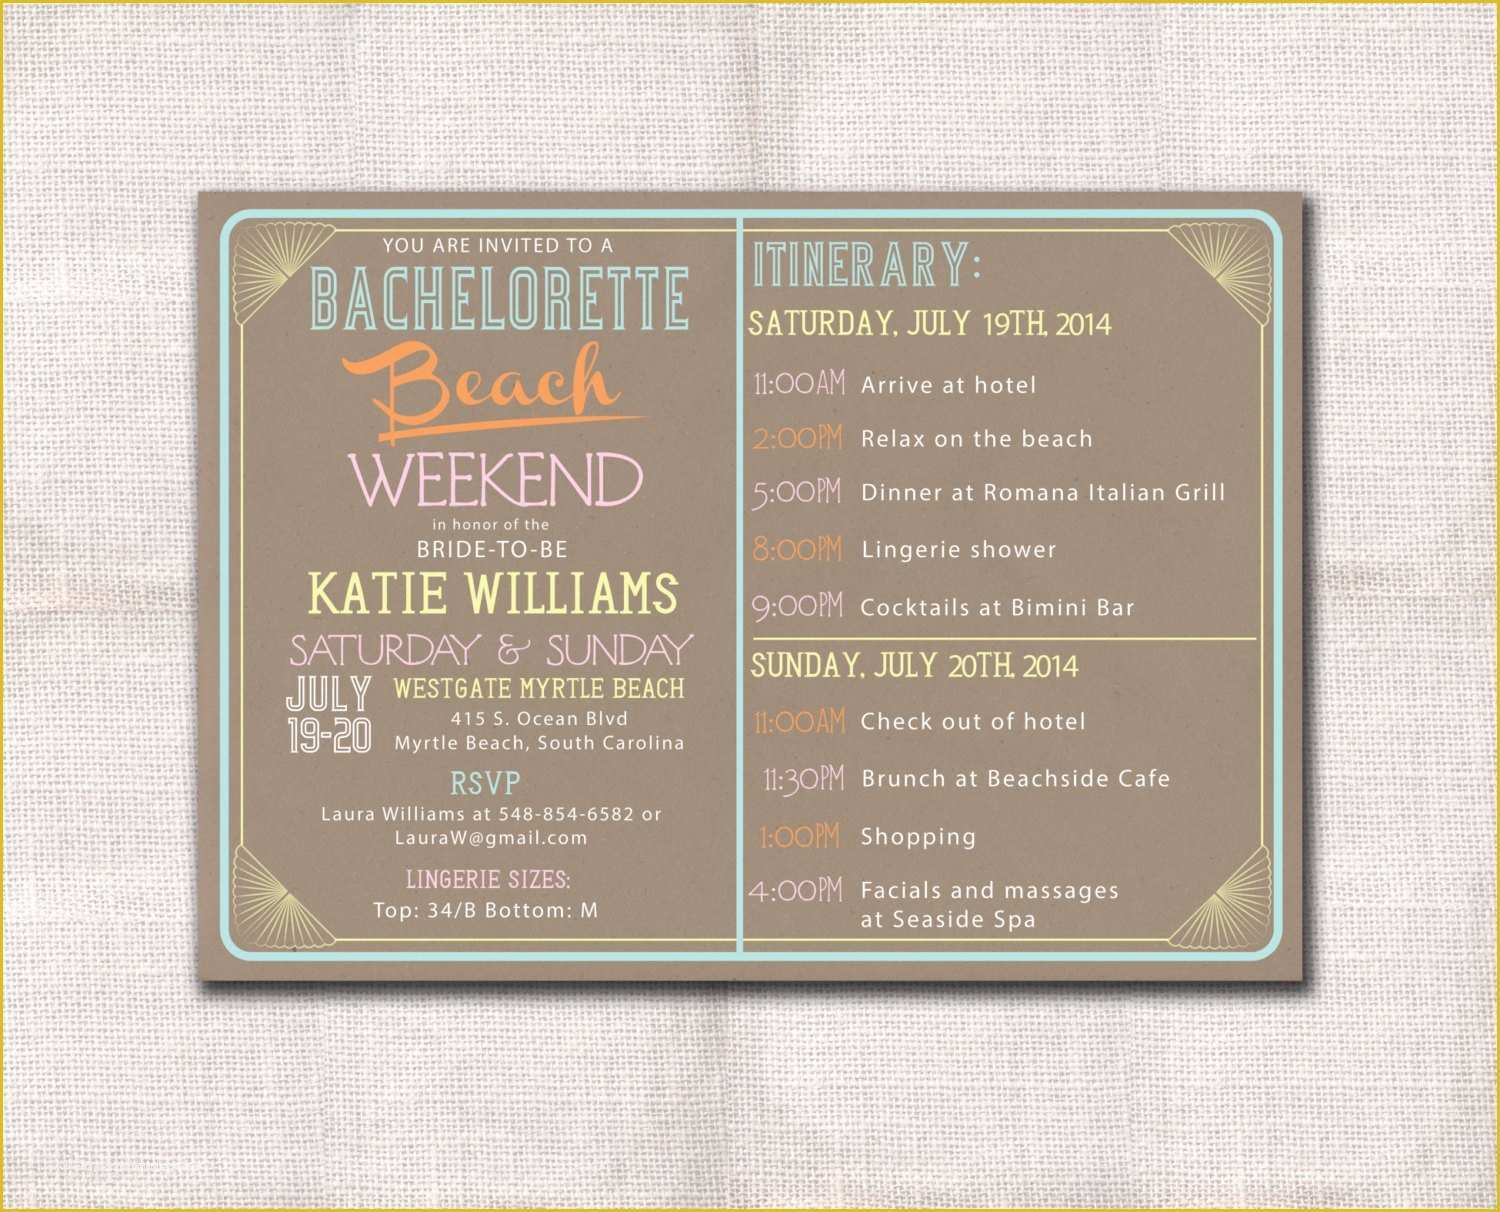 Bachelorette Itinerary Template Free Of Bachelorette Party Weekend Invitation and Itinerary Custom